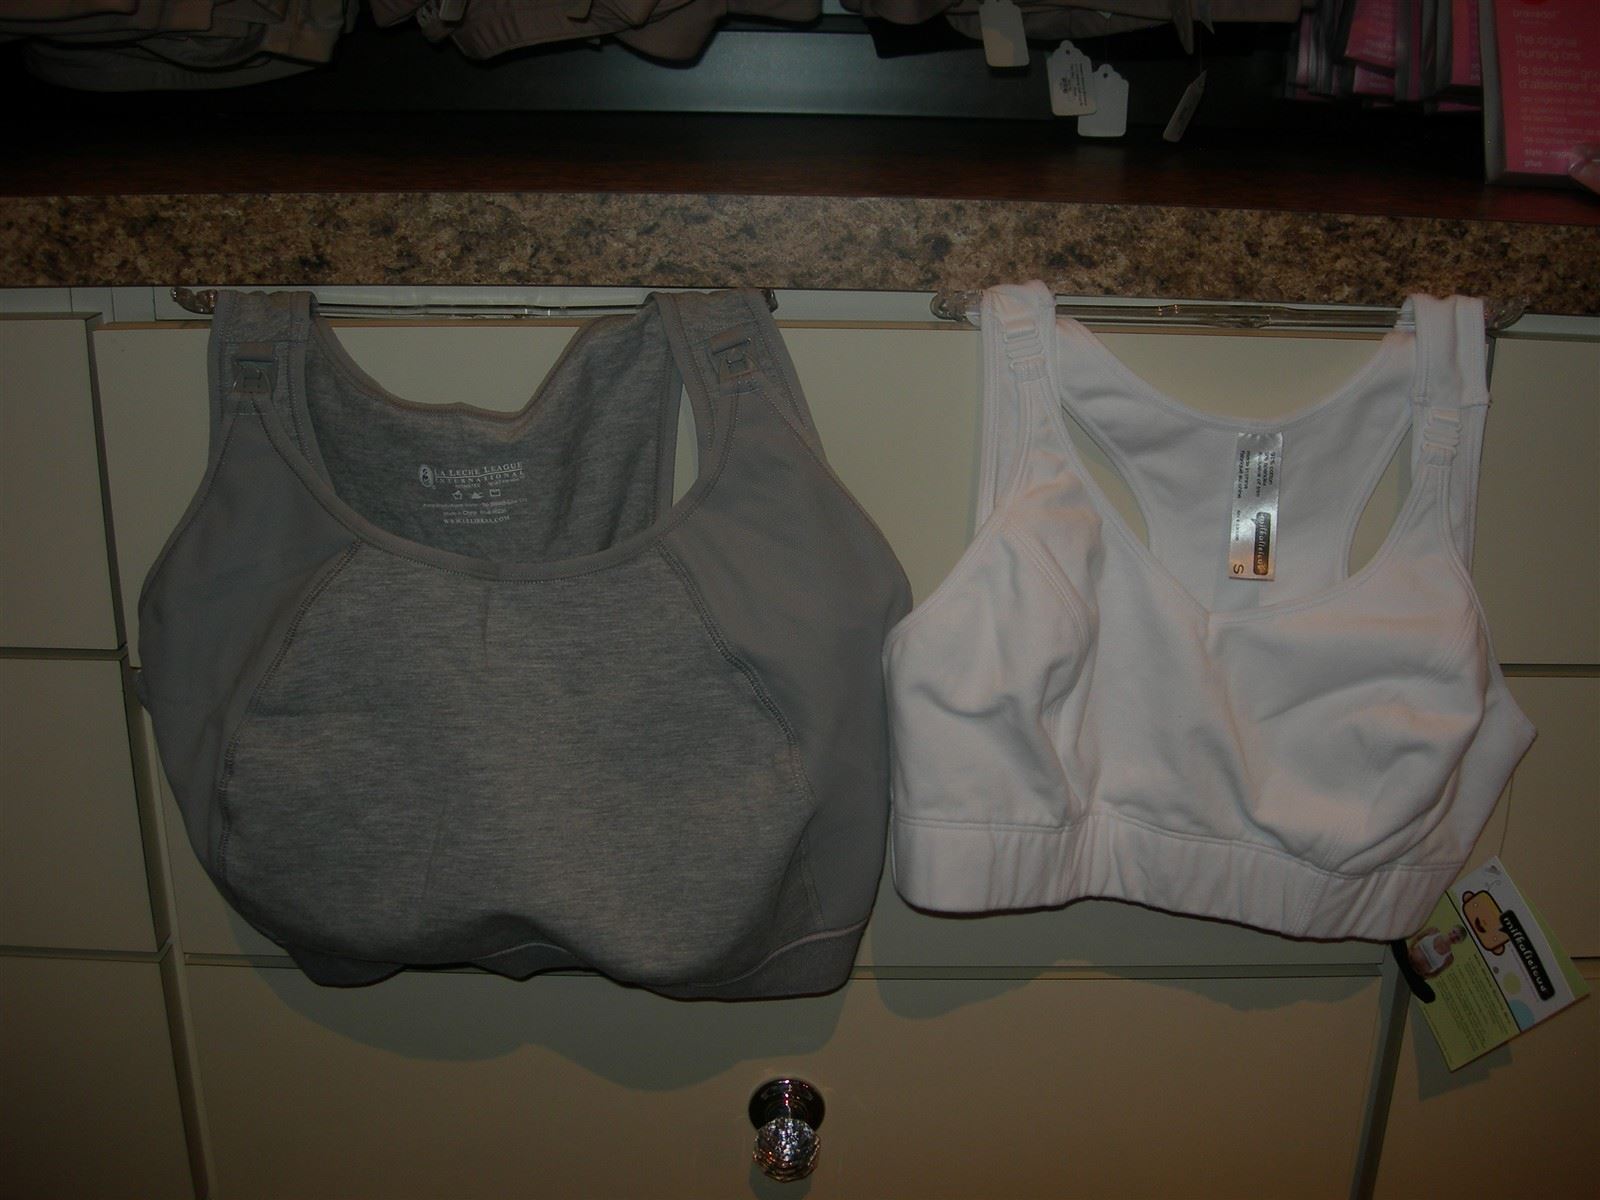 Sports Bras : Some comfy and supportive options: 
By La Leche League in Gray;
By  Milkalicious in White